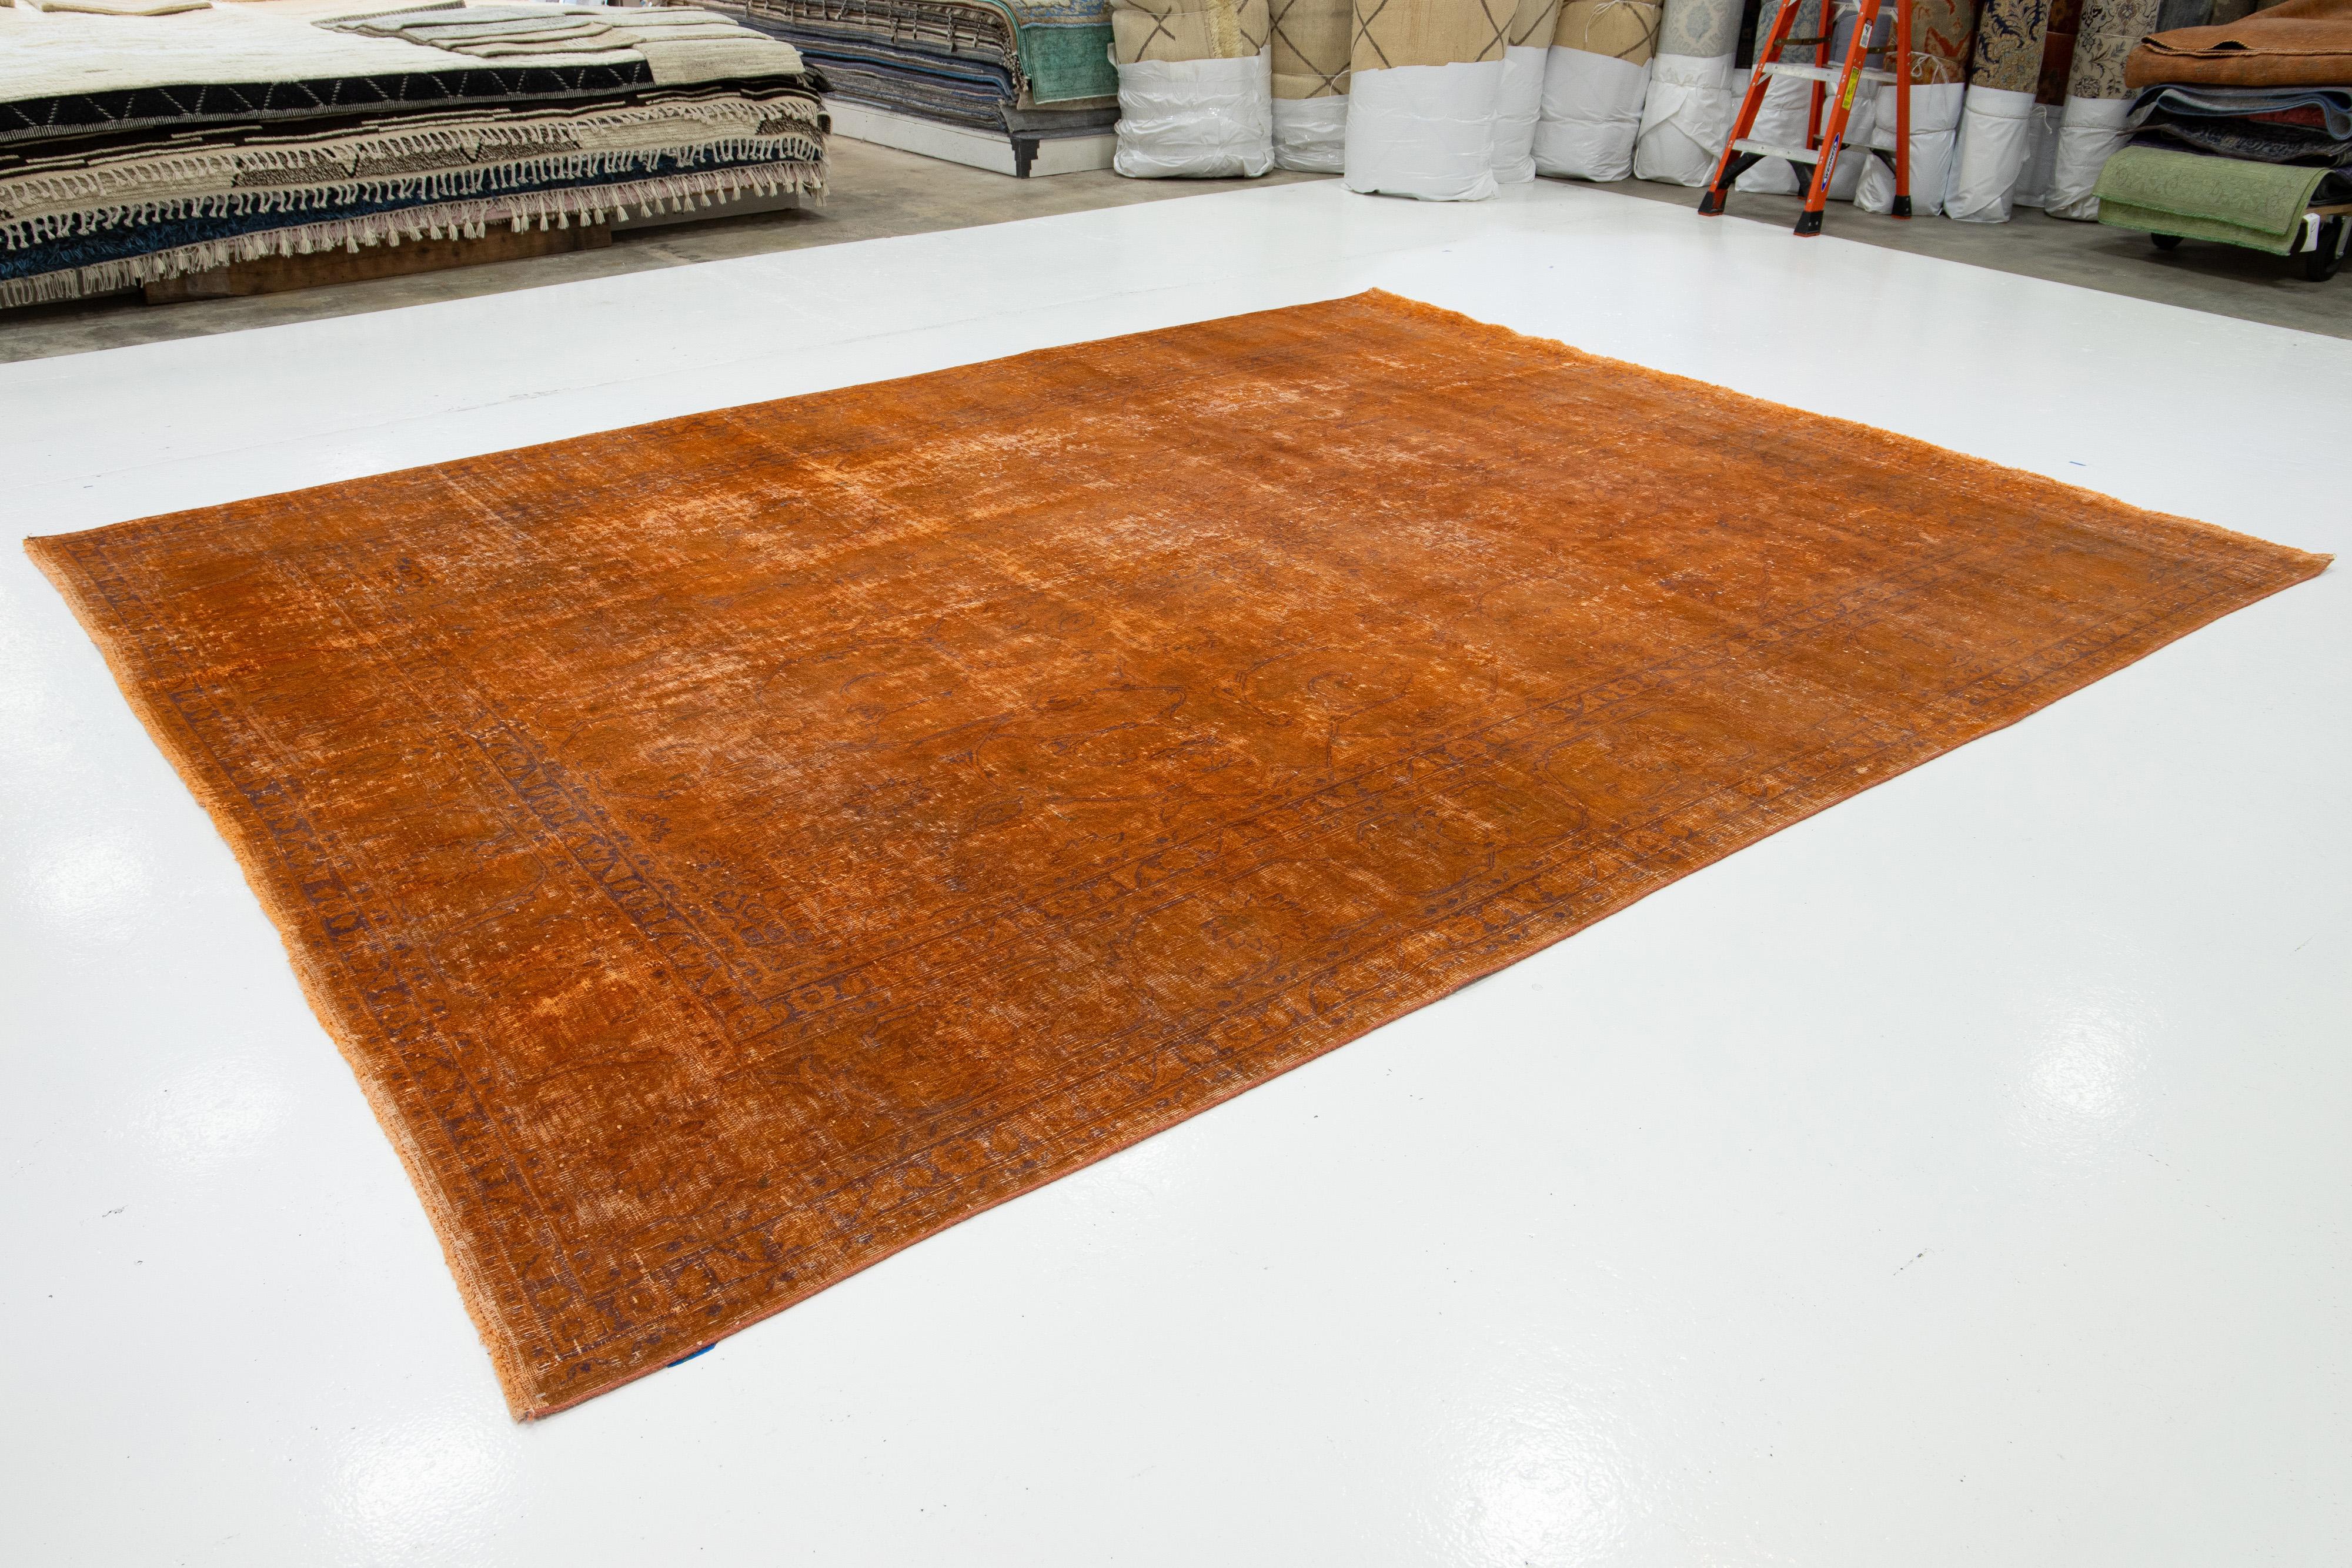 Allover Designed Antique Persian Overdyed Wool Rug In Orange In Good Condition For Sale In Norwalk, CT